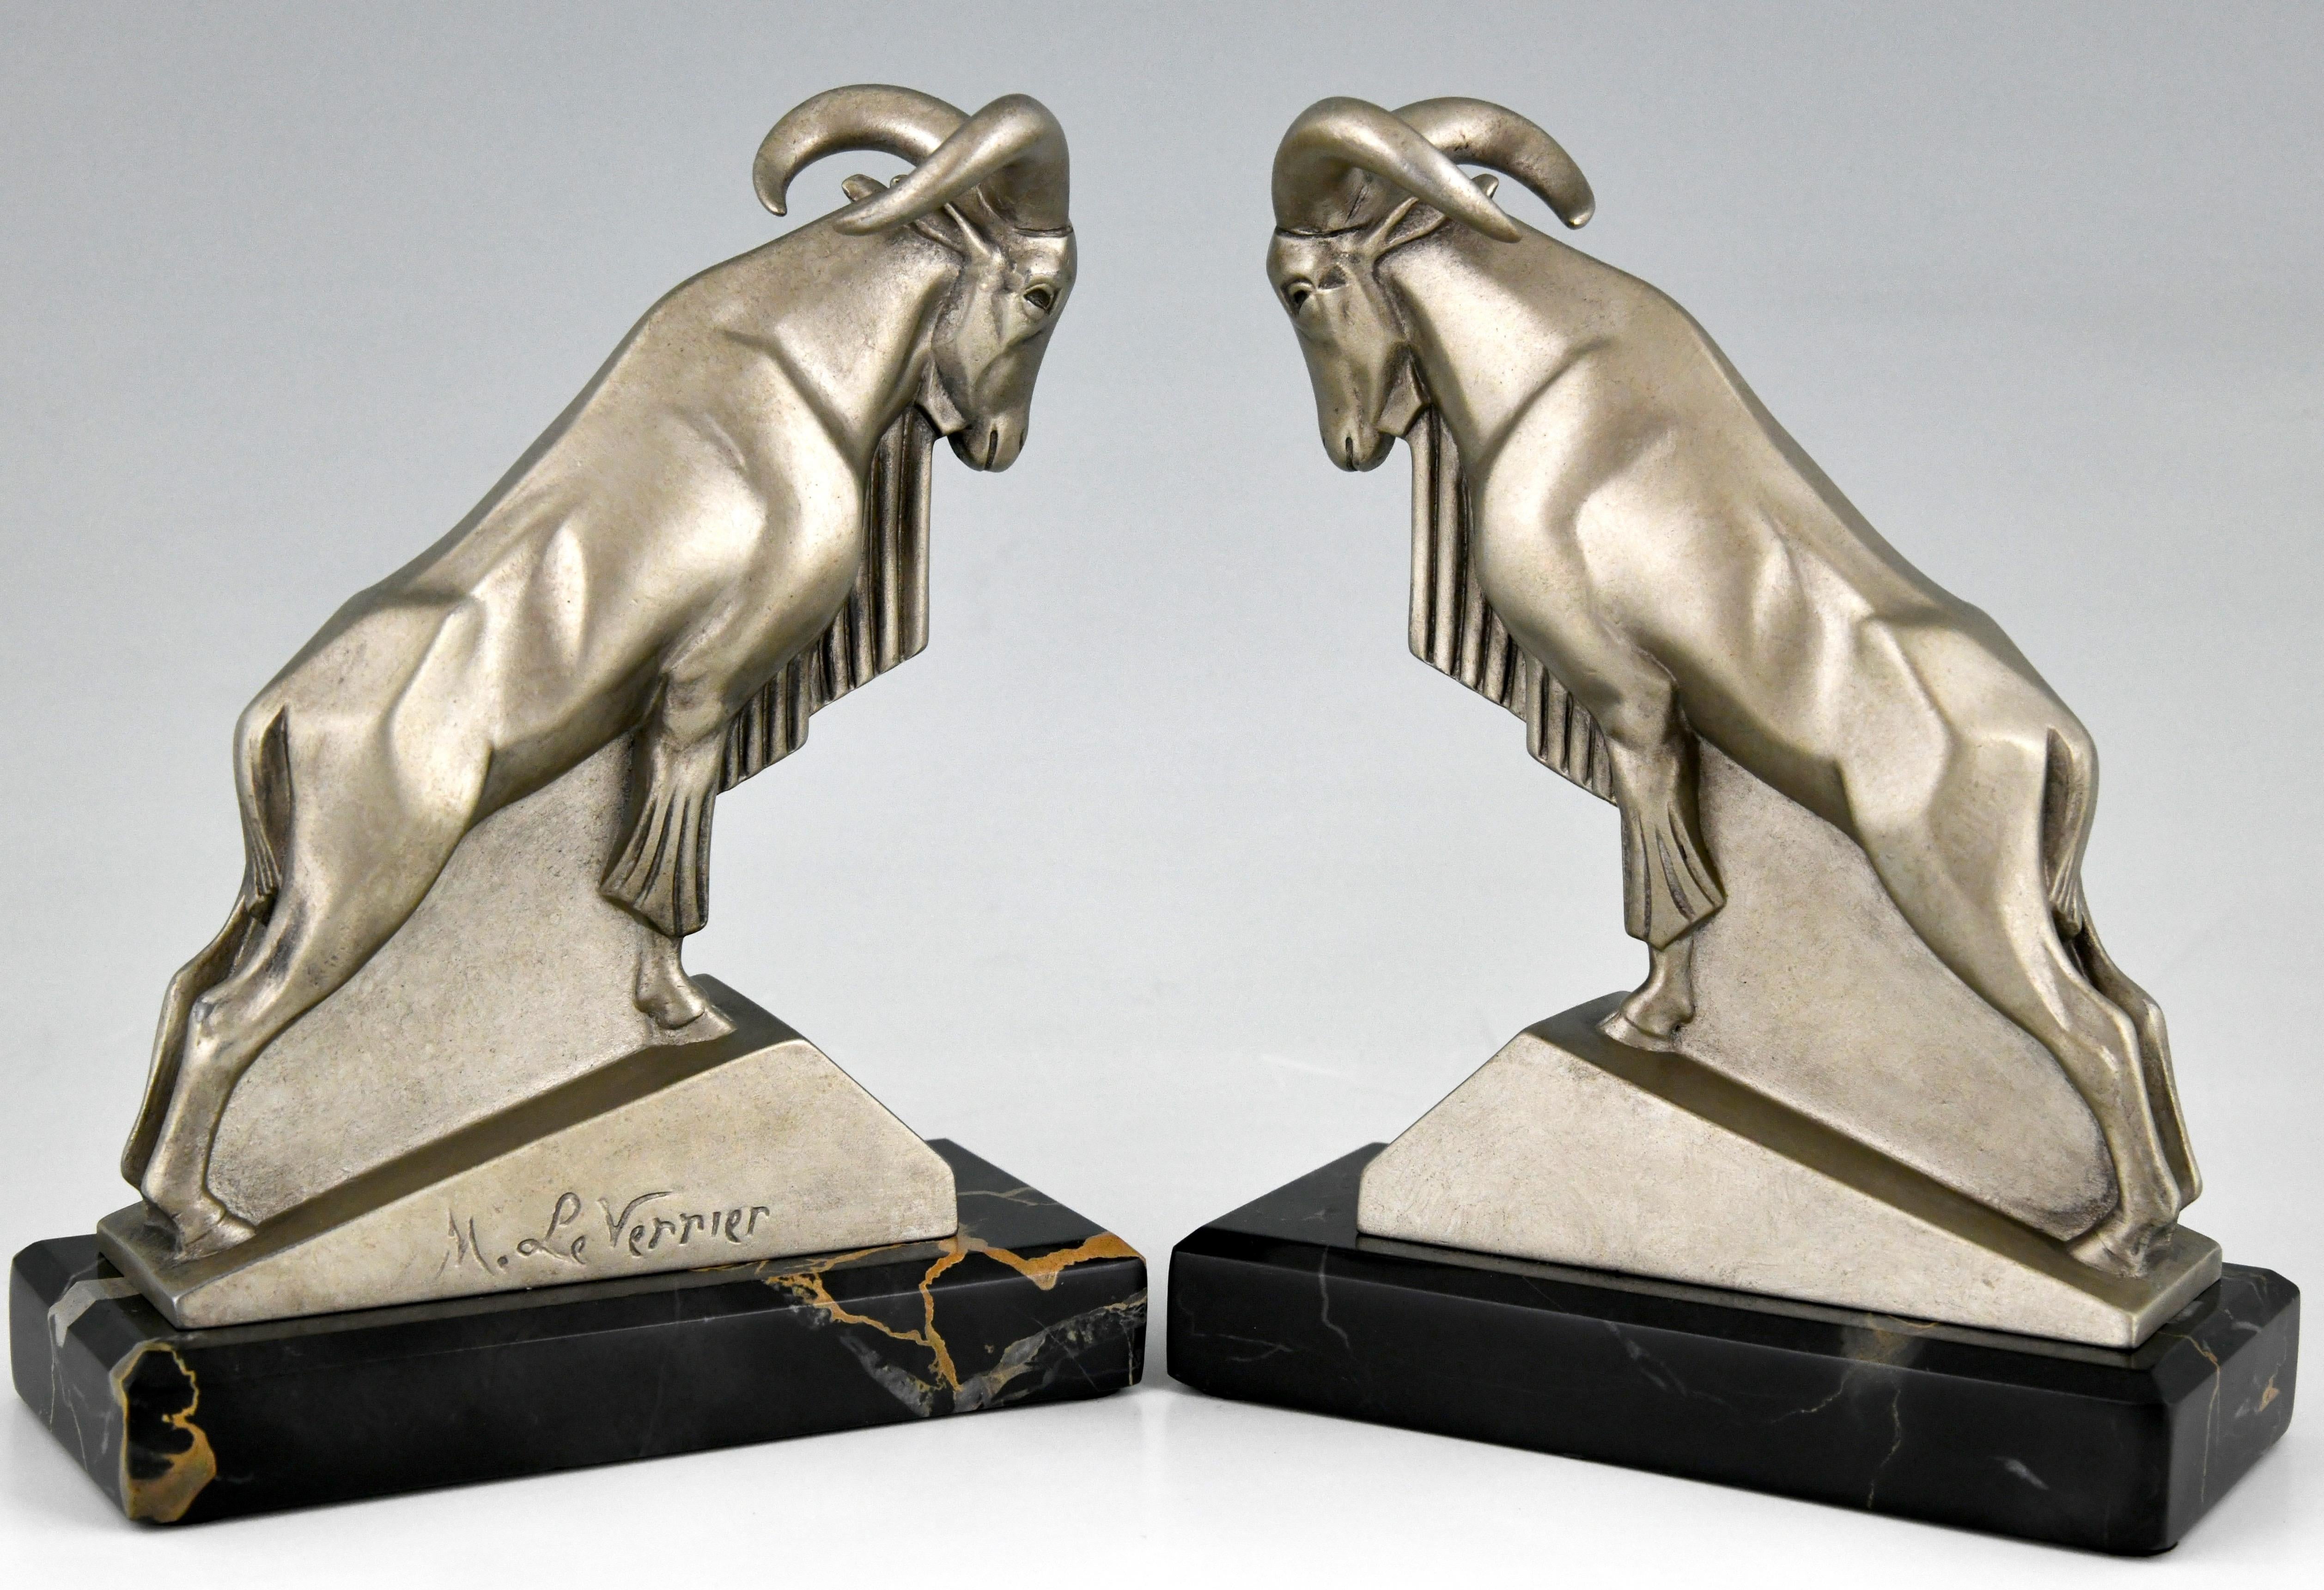 Stylish Art Deco Ibex or Ram bookends, signed by the well know sculptor Max Le Verrier with lovely silver patina.
The bookends are mounted on portor marble bases. France 1930. 

“Art deco sculpture” by Victor Arwas, Academy. ?“Bronzes, sculptors